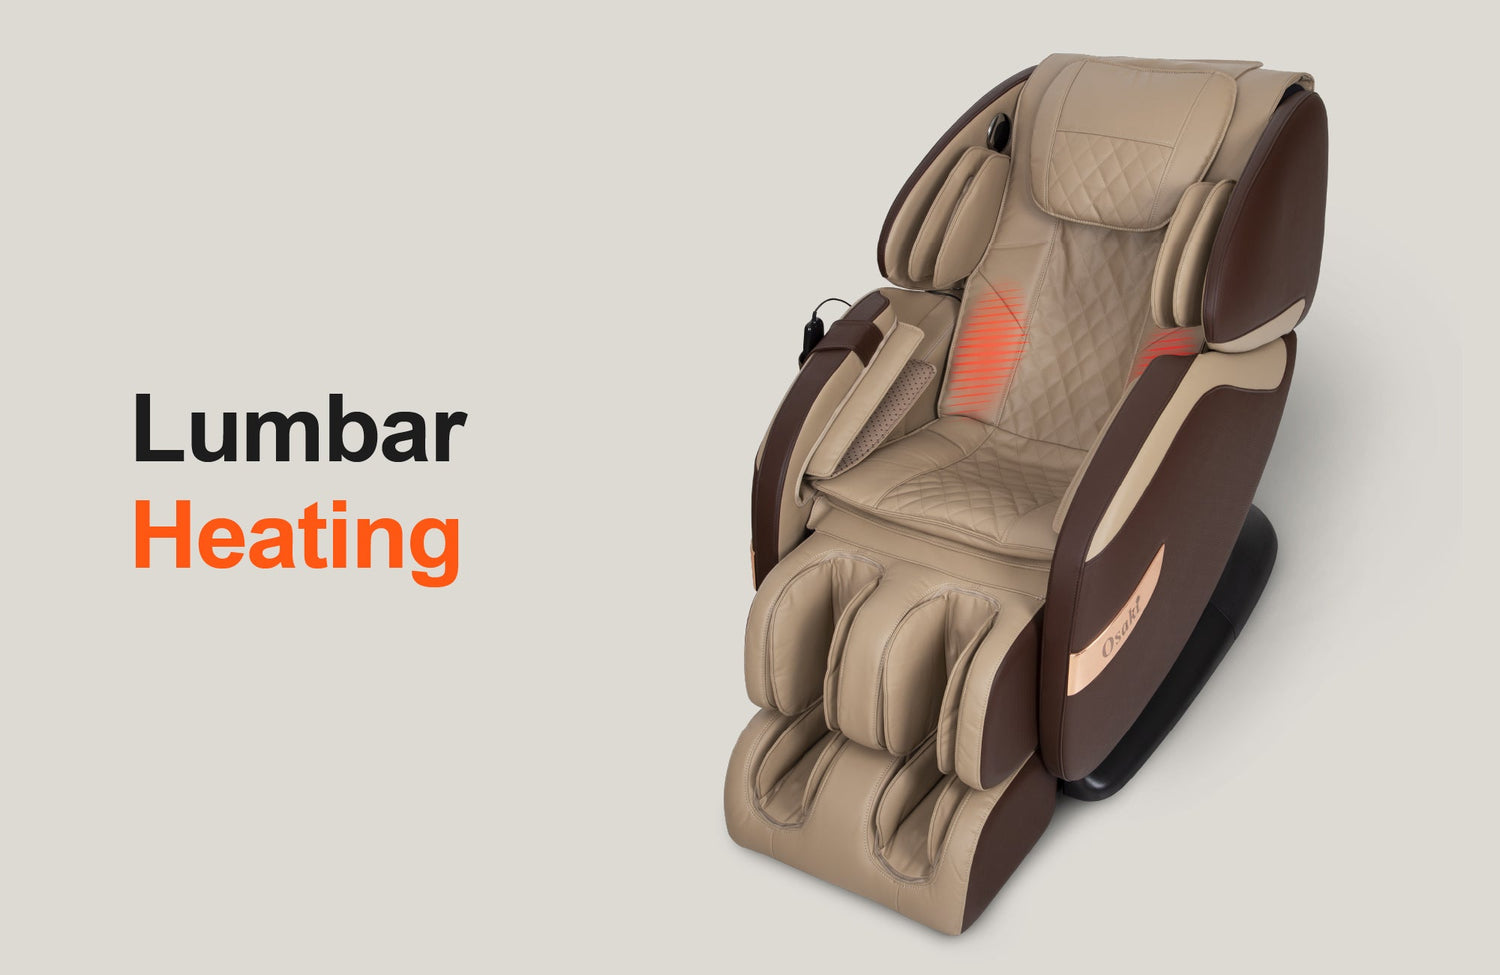 The Osaki OS-Champ includes two heating pads in the lumbar area for heat therapy, enhancing the roller and airbag massage by improving blood circulation and loosening tense muscles.